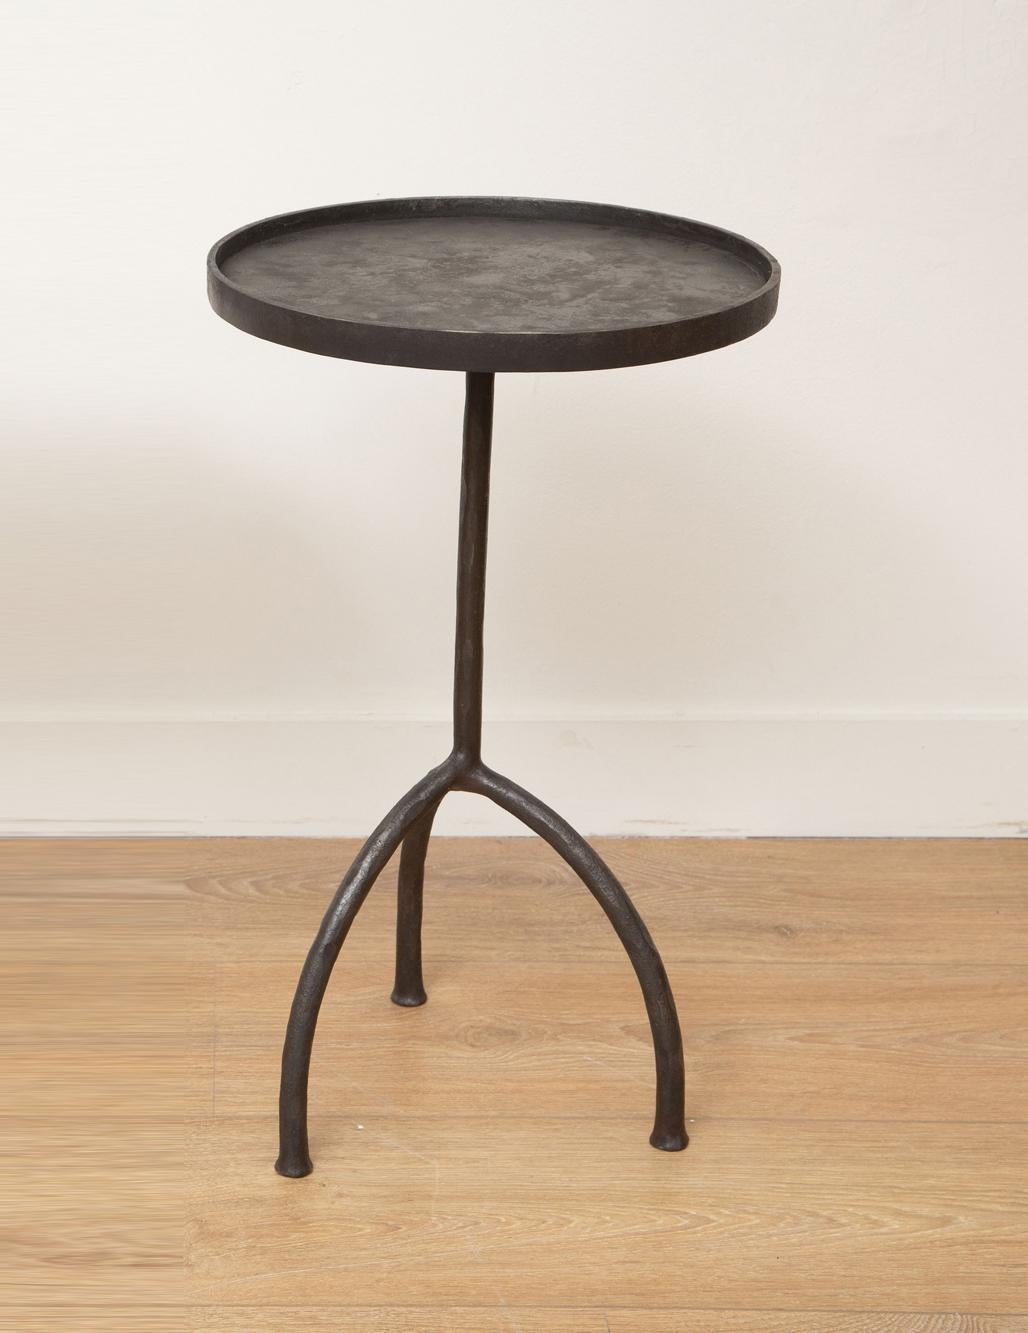 Single custom tripod hand-forged side or drinks table, in stock
Hand-forged iron legs, round top with lip
Dark bronze patina
Perfect for drinks, side, end tables
Pair available
Ready to ship from our showroom in Miami.